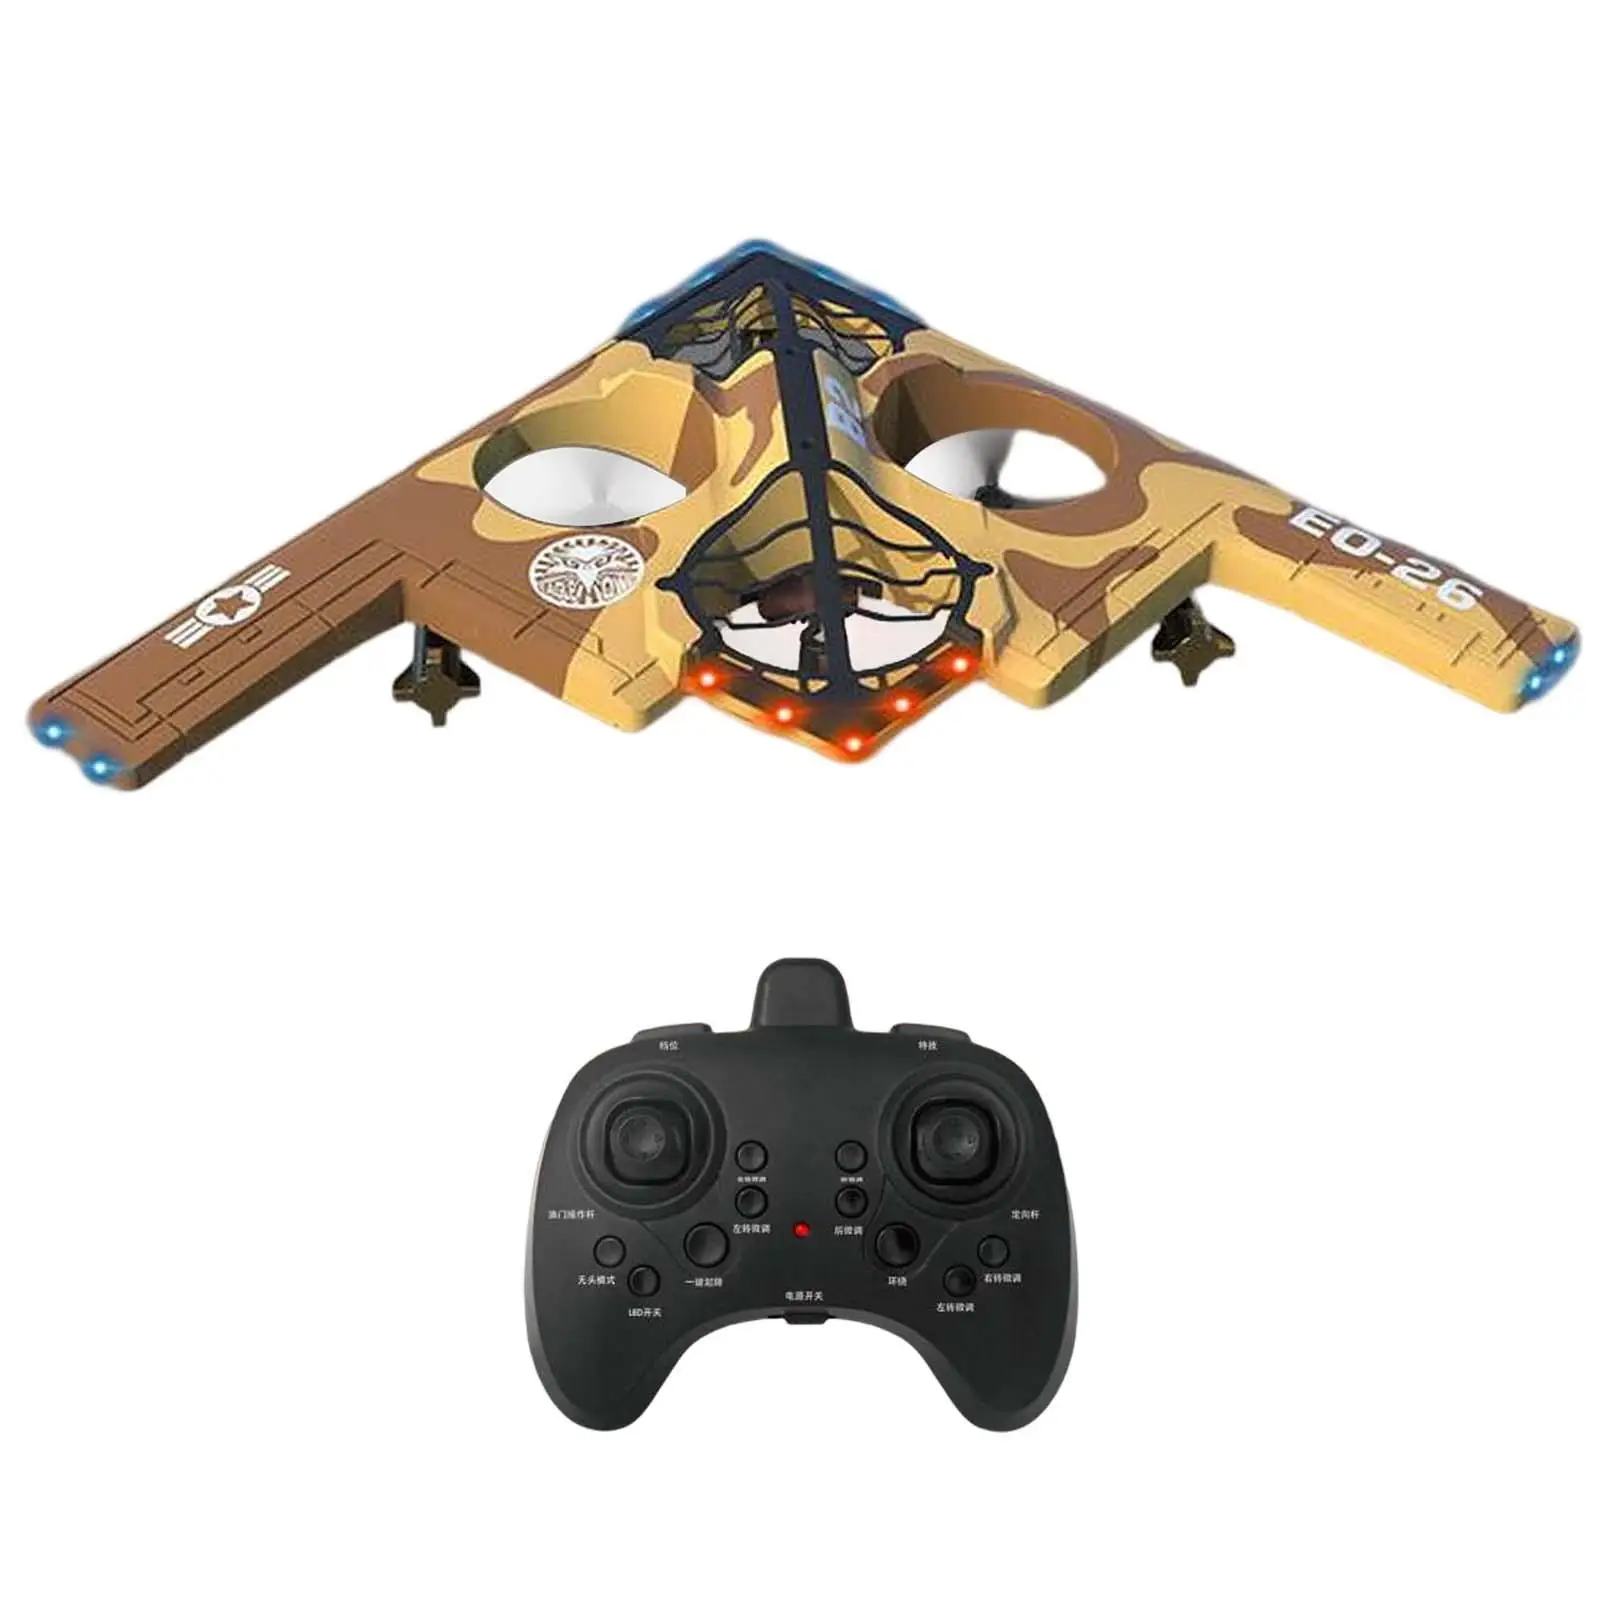 Foam Foam RC Aircraft 2.4G 6 Channels Flip Hover Stunting Plane Glider Fighter Fixed Wing for Beginner Easy to Control